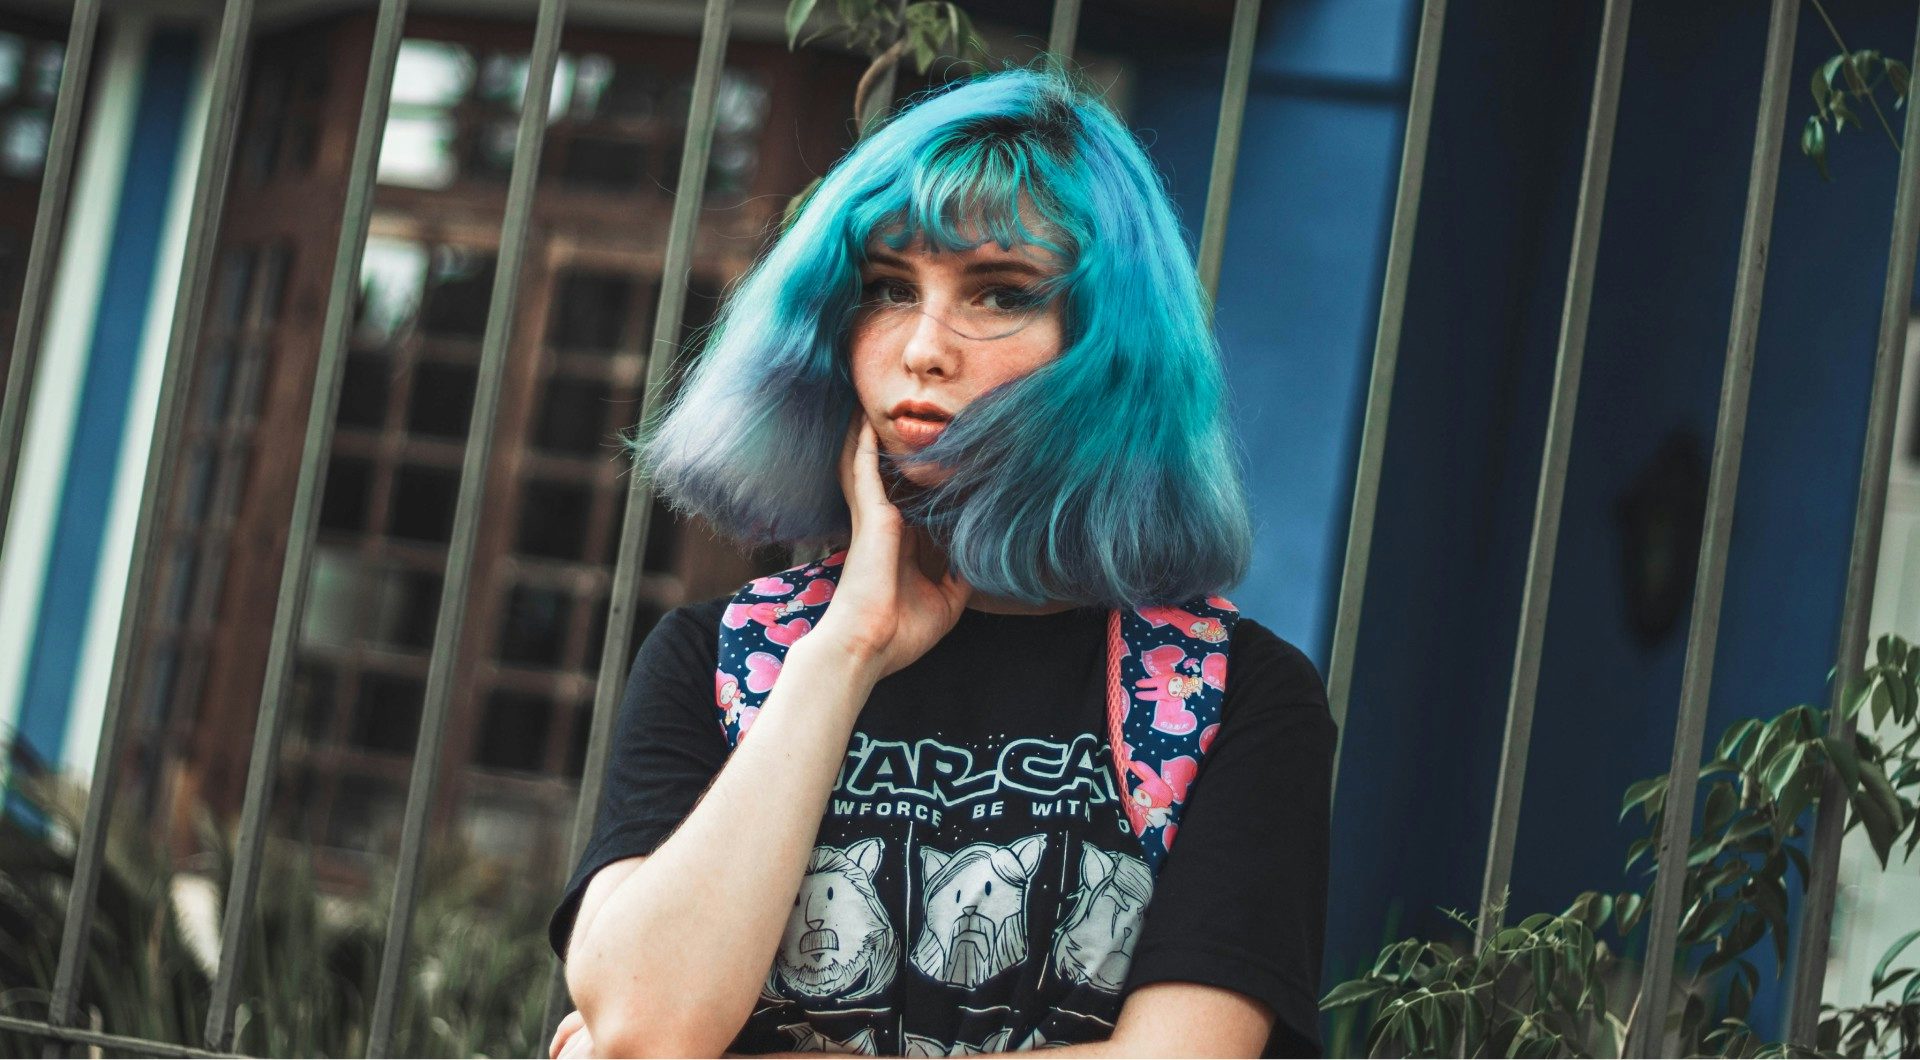 Young girl with blue hair standing outside a bank